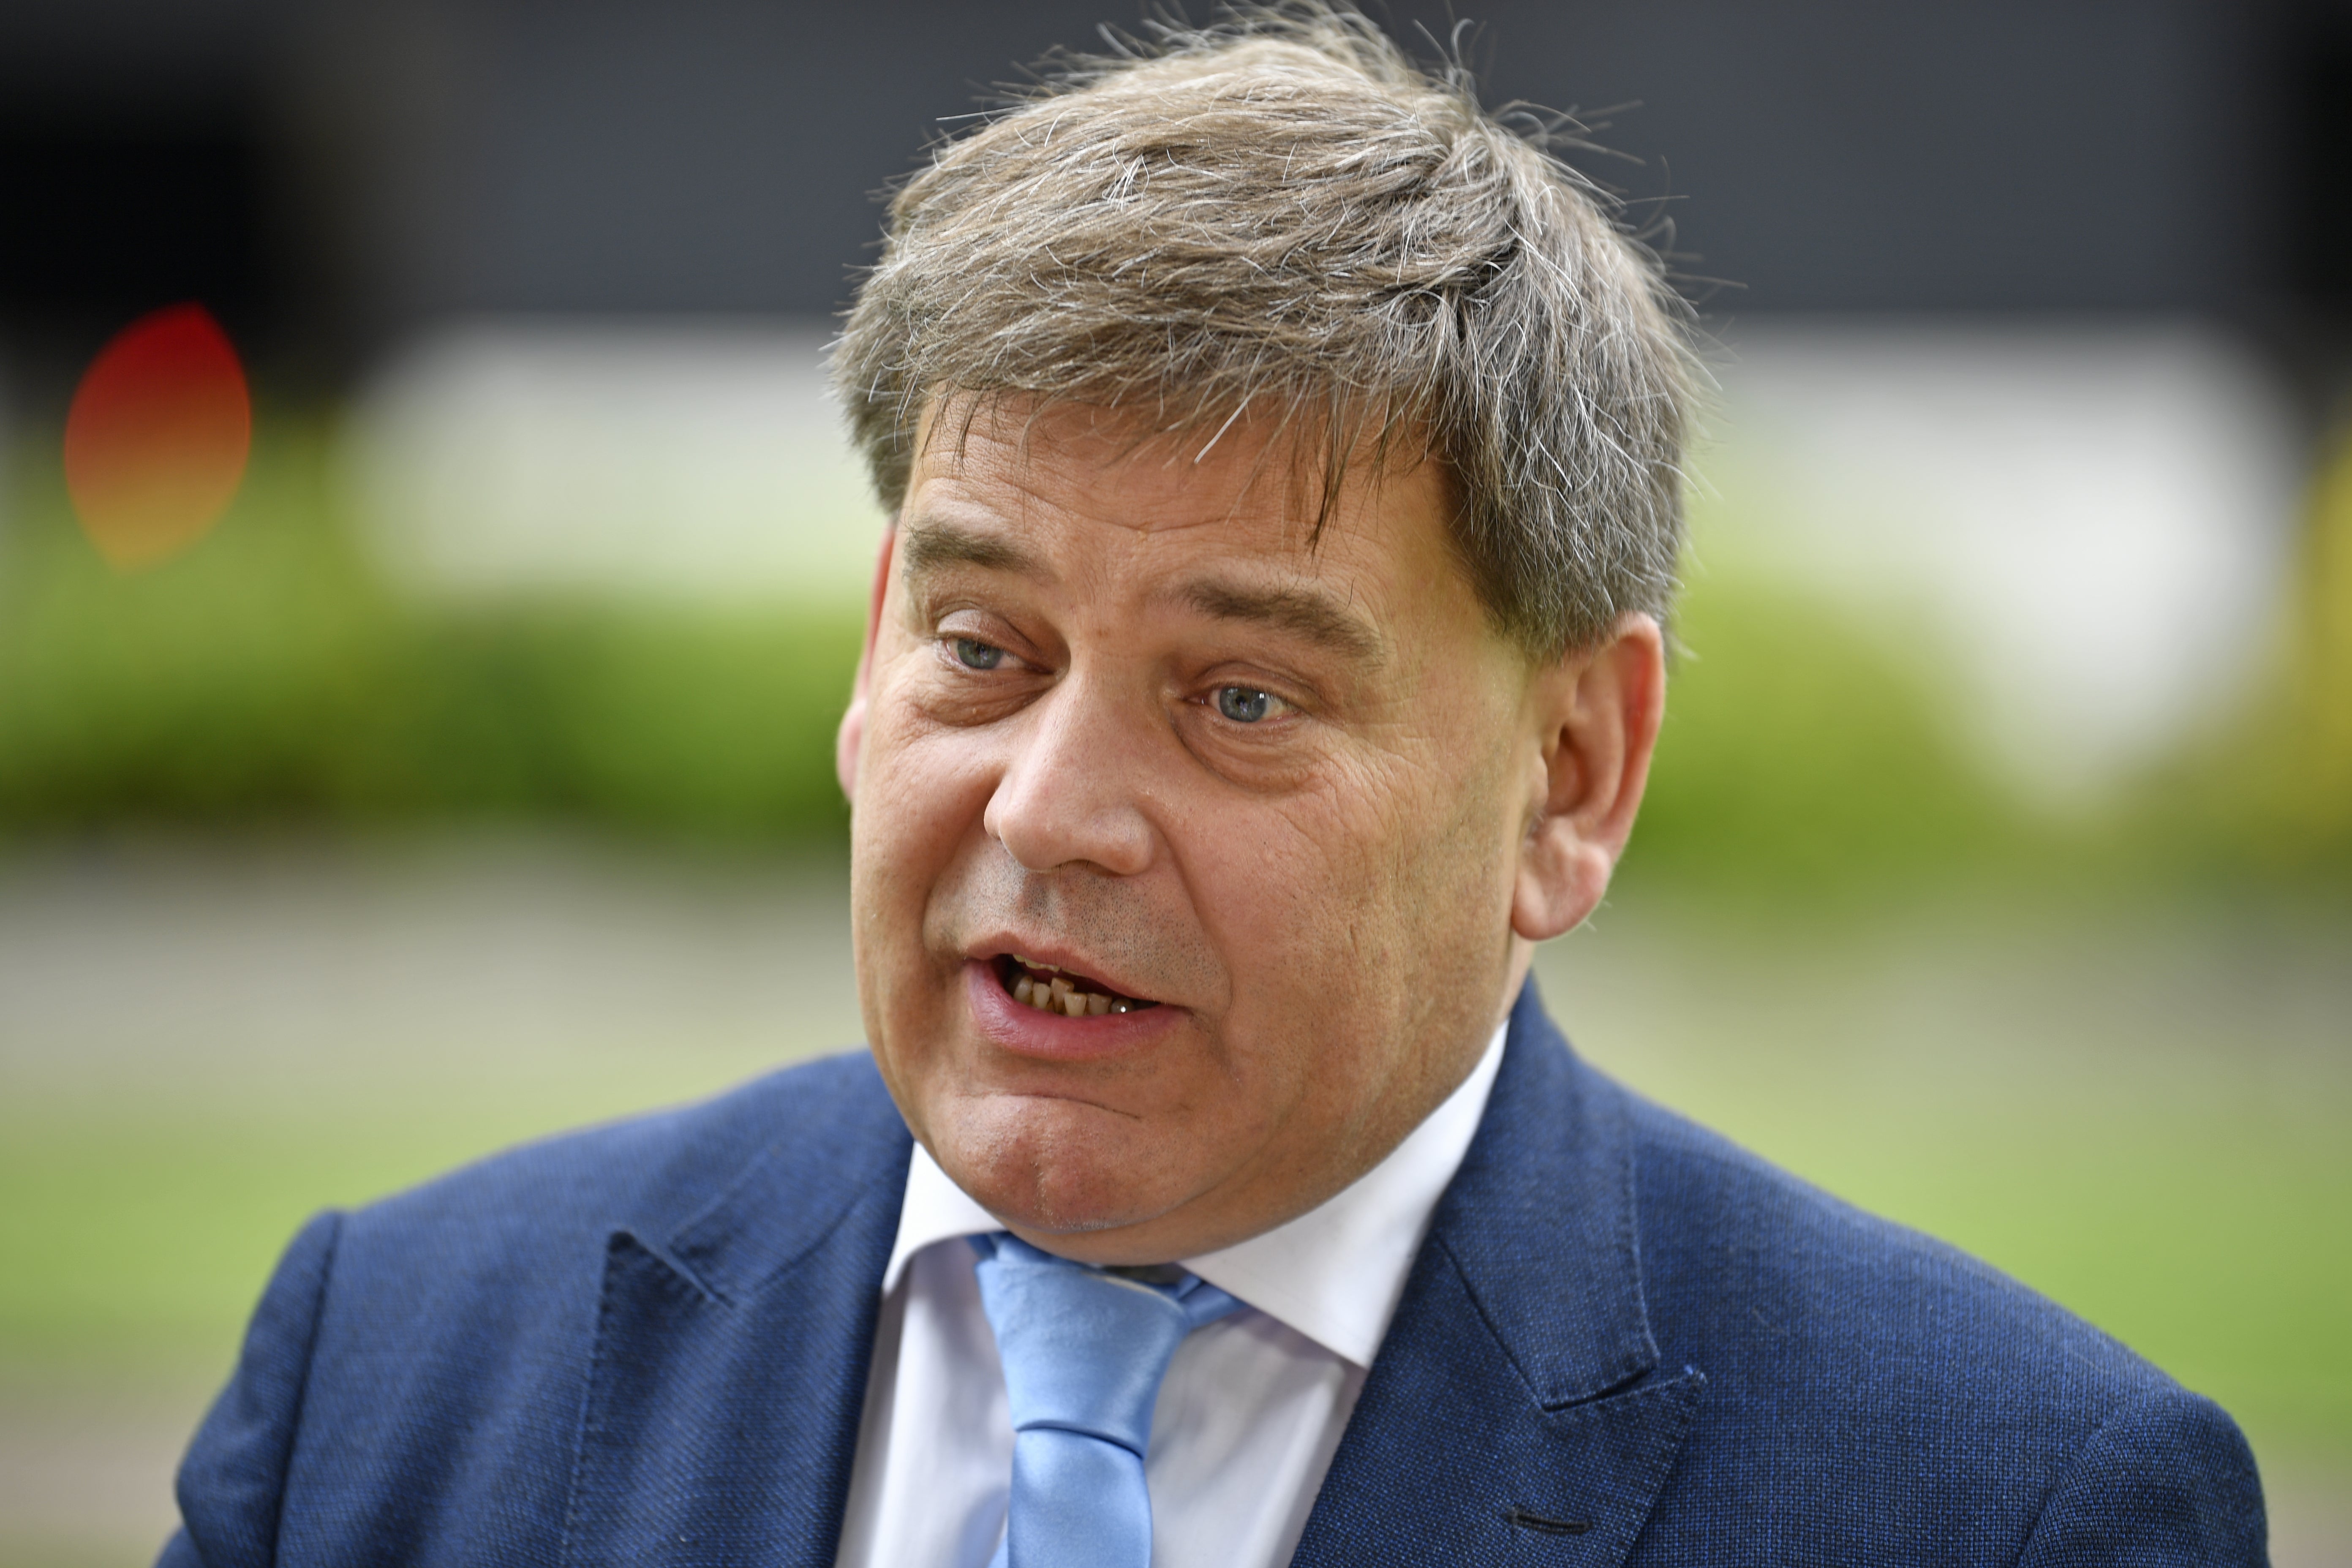 Tory MP Andrew Bridgen said Boris Johnson should now ‘leave with honour and residual affection for what he has achieved’ (Beresford Hodge/PA)